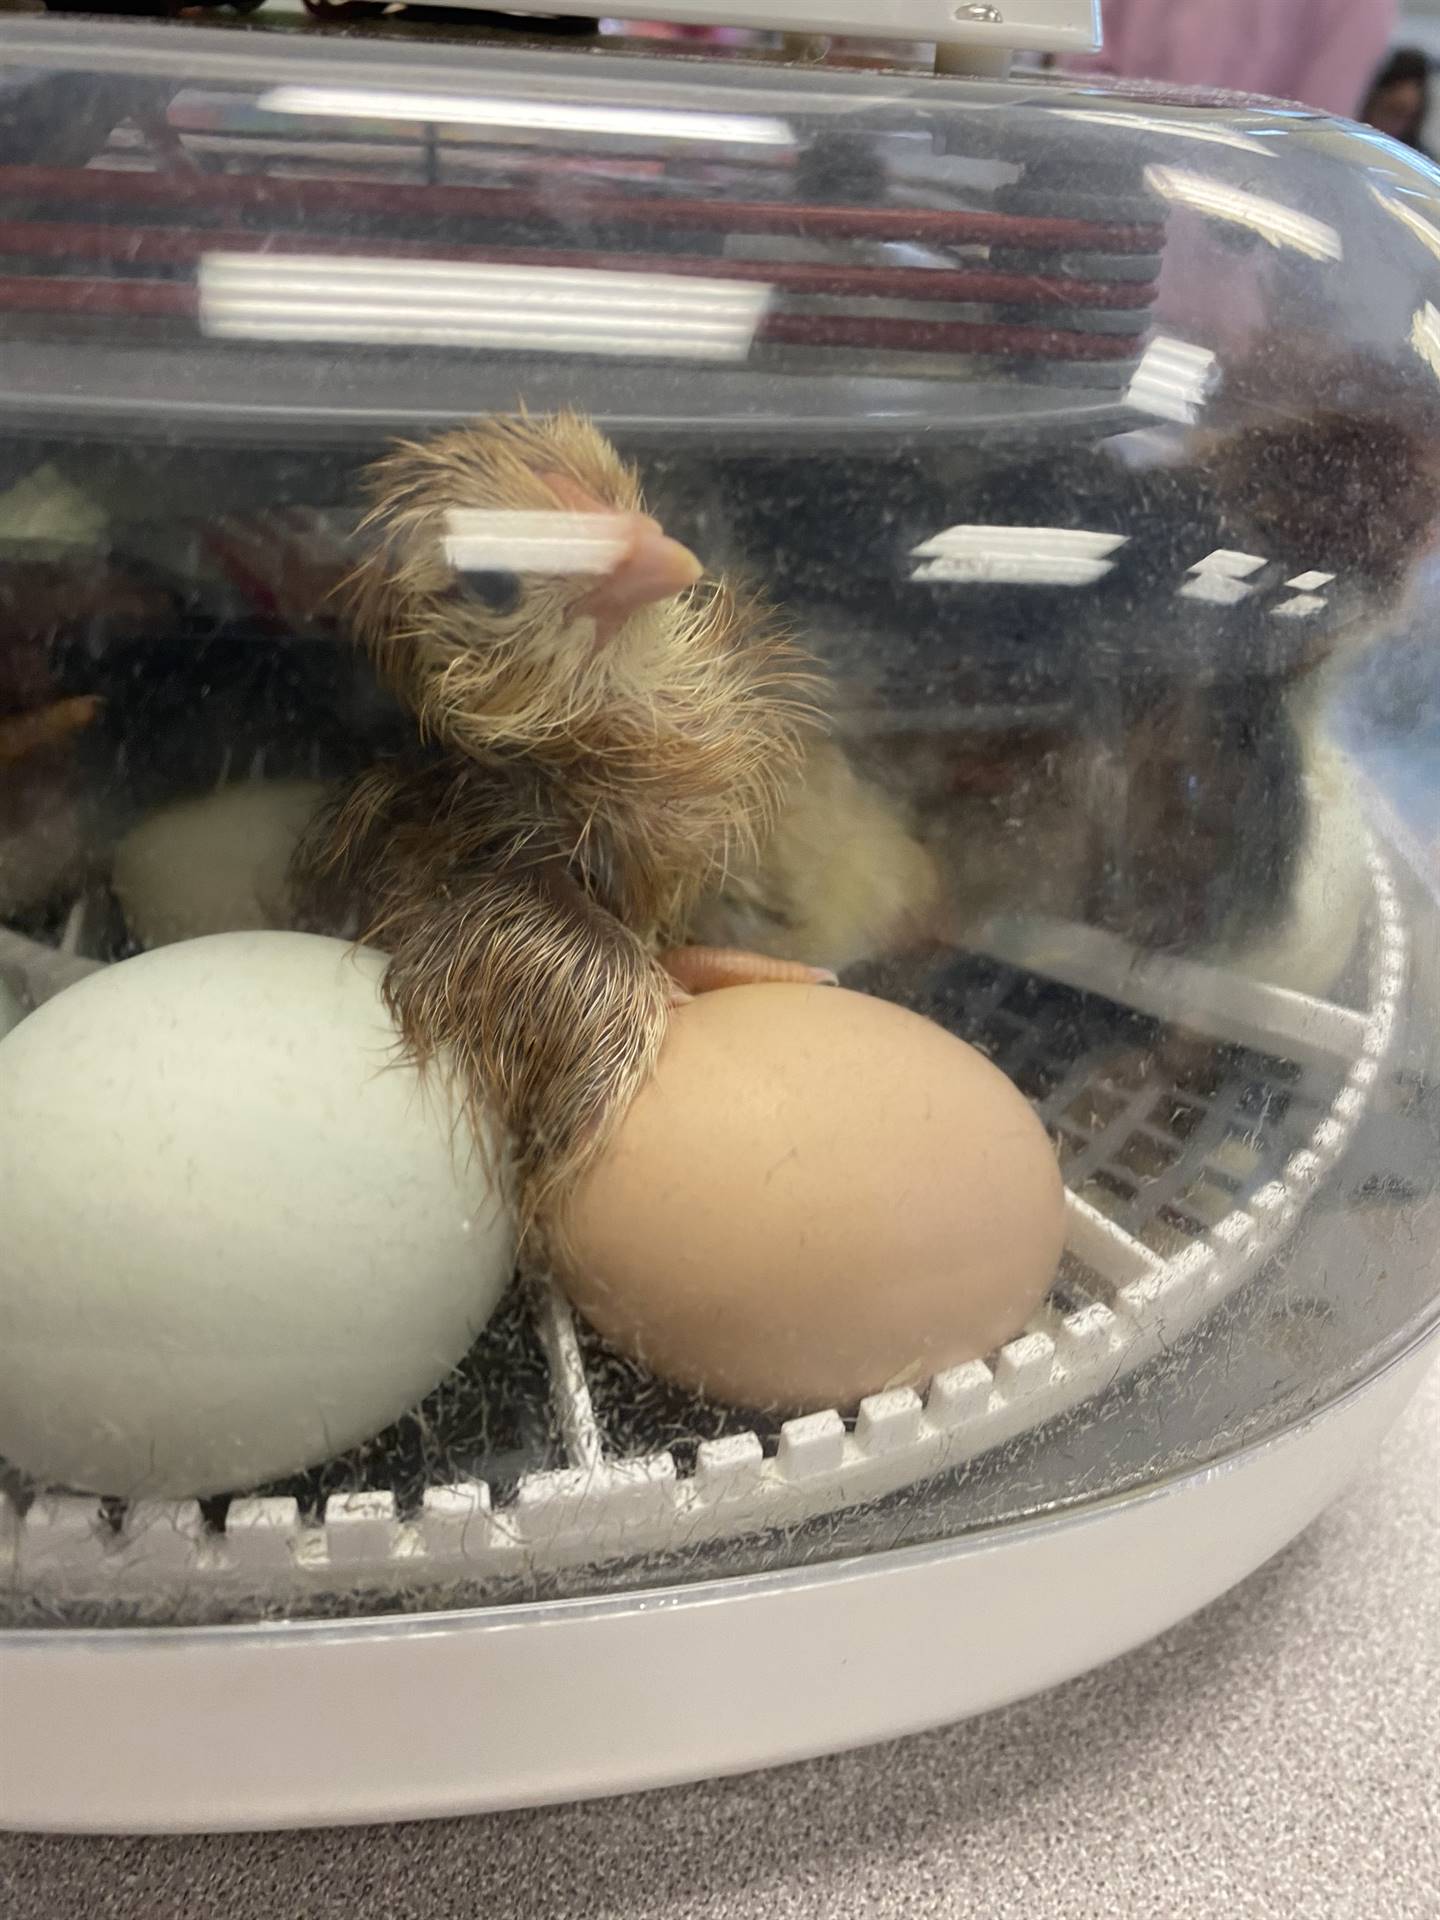 A newly hatched chick